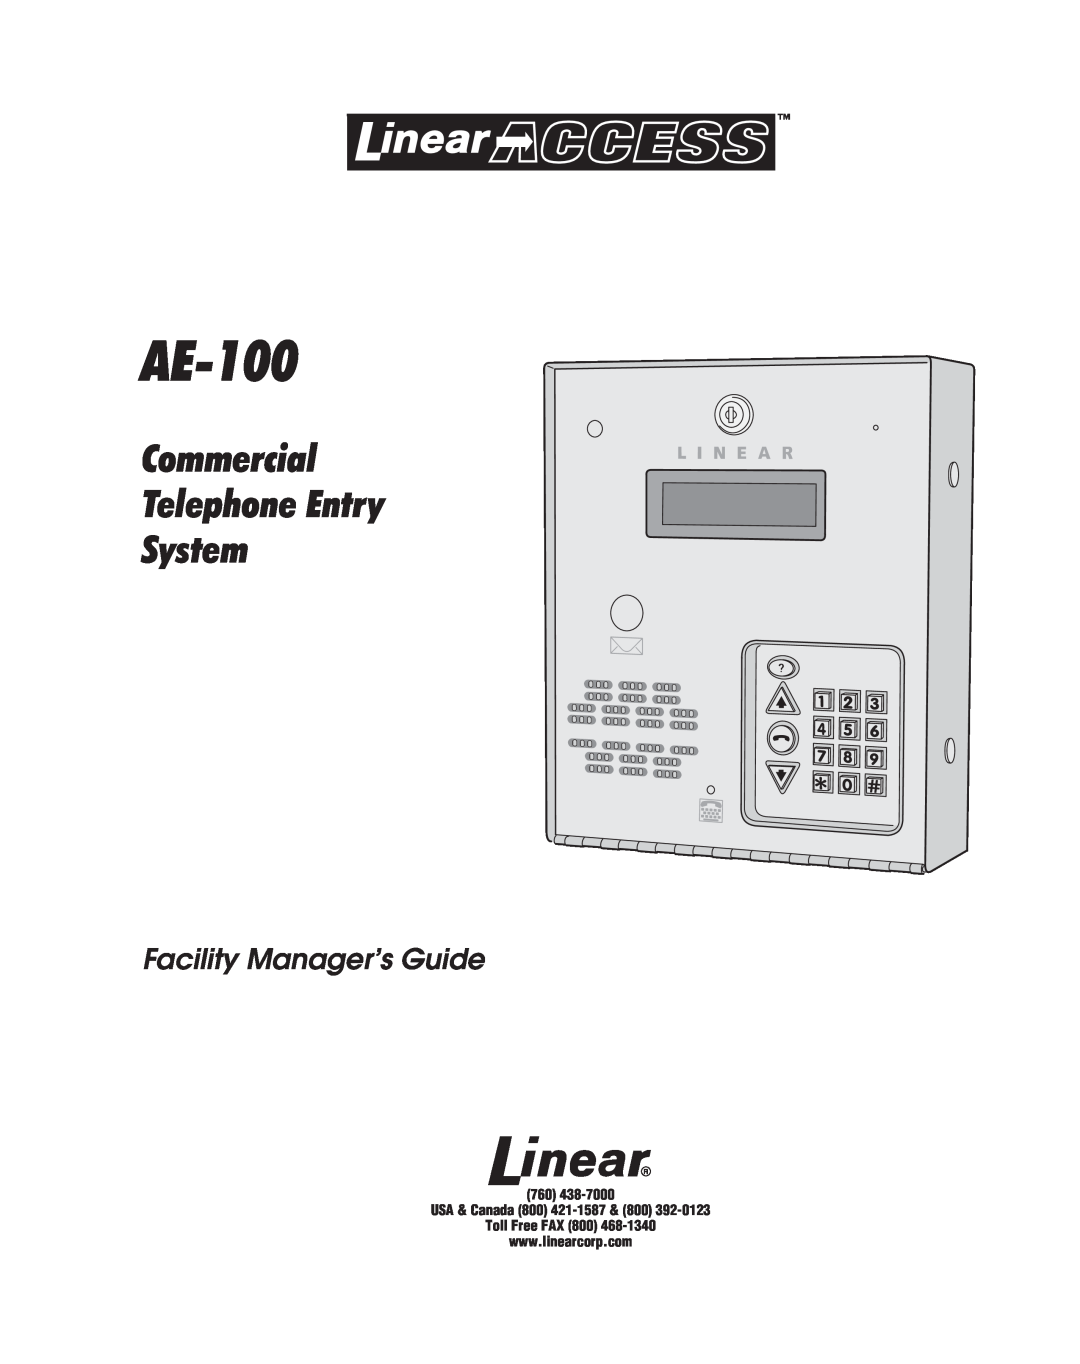 Linear AE-100 manual Commercial Telephone Entry System, Facility Manager’s Guide, USA & Canada 